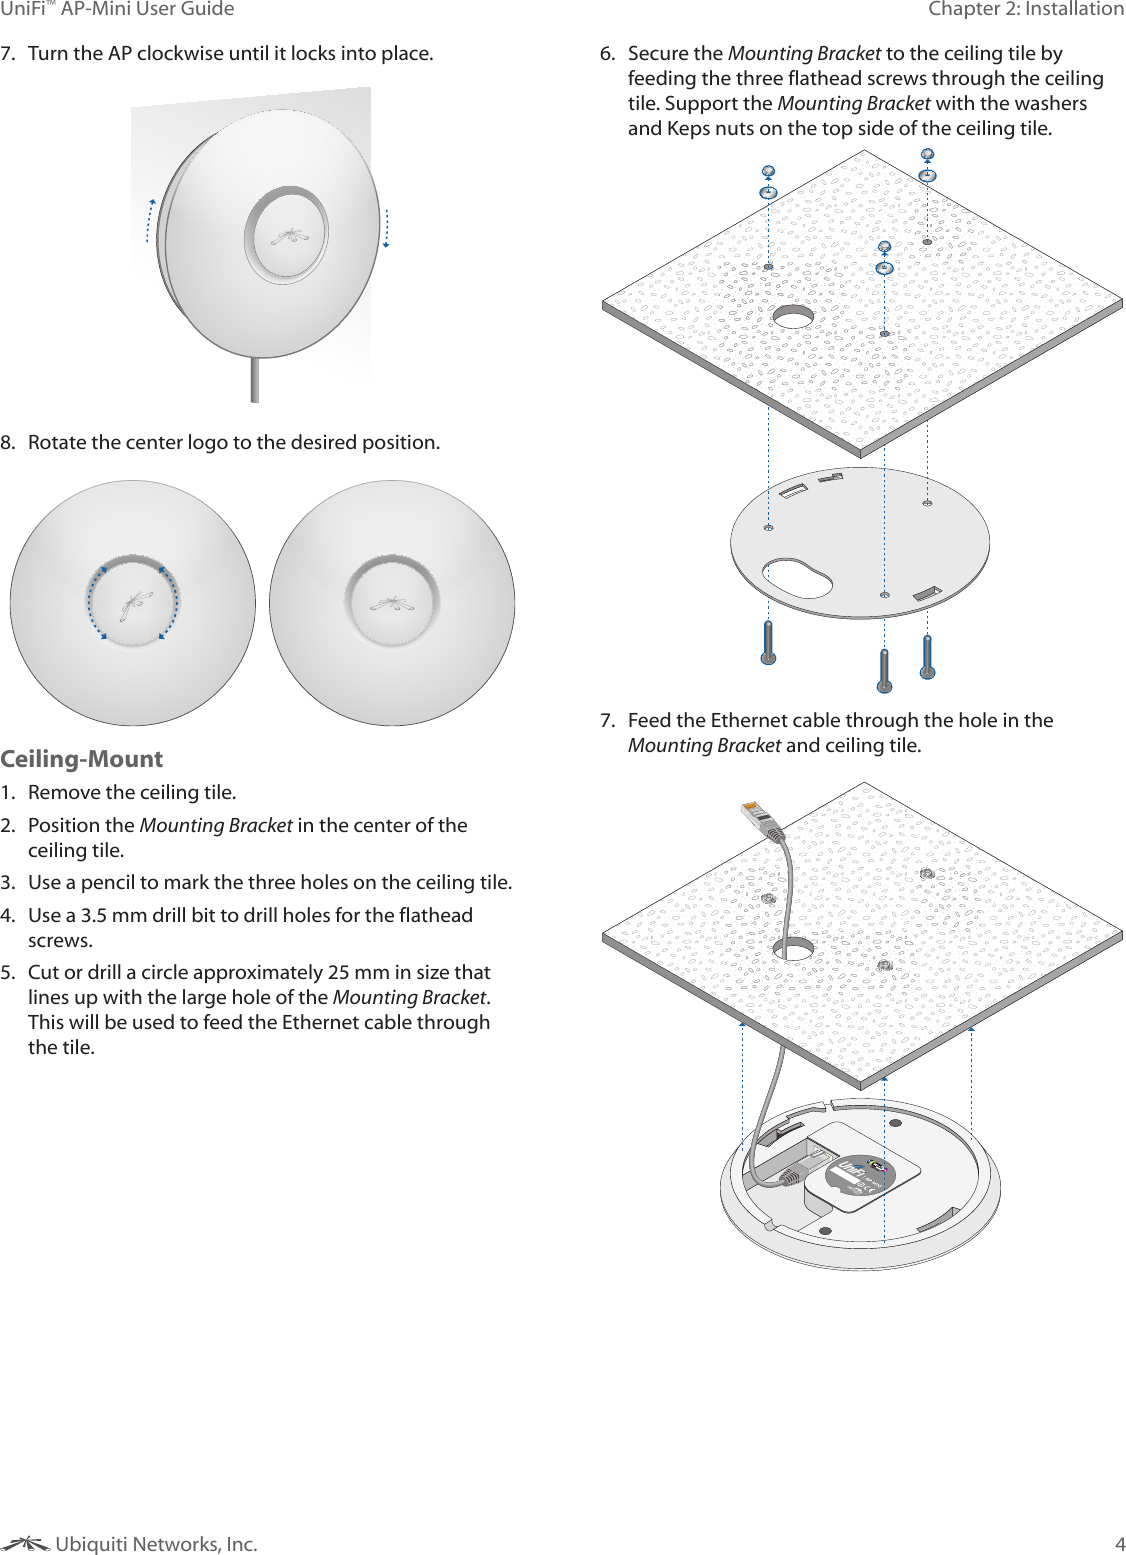 4Chapter 2: InstallationUniFi™ AP-Mini User Guide Ubiquiti Networks, Inc.7.  Turn the AP clockwise until it locks into place.8.  Rotate the center logo to the desired position.Ceiling-Mount1.  Remove the ceiling tile.2.  Position the Mounting Bracket in the center of the ceiling tile.3.  Use a pencil to mark the three holes on the ceiling tile.4.  Use a 3.5 mm drill bit to drill holes for the flathead screws.5.  Cut or drill a circle approximately 25 mm in size that lines up with the large hole of the Mounting Bracket. This will be used to feed the Ethernet cable through the tile. 6.  Secure the Mounting Bracket to the ceiling tile by feeding the three flathead screws through the ceiling tile. Support the Mounting Bracket with the washers and Keps nuts on the top side of the ceiling tile.7.  Feed the Ethernet cable through the hole in the Mounting Bracket and ceiling tile.